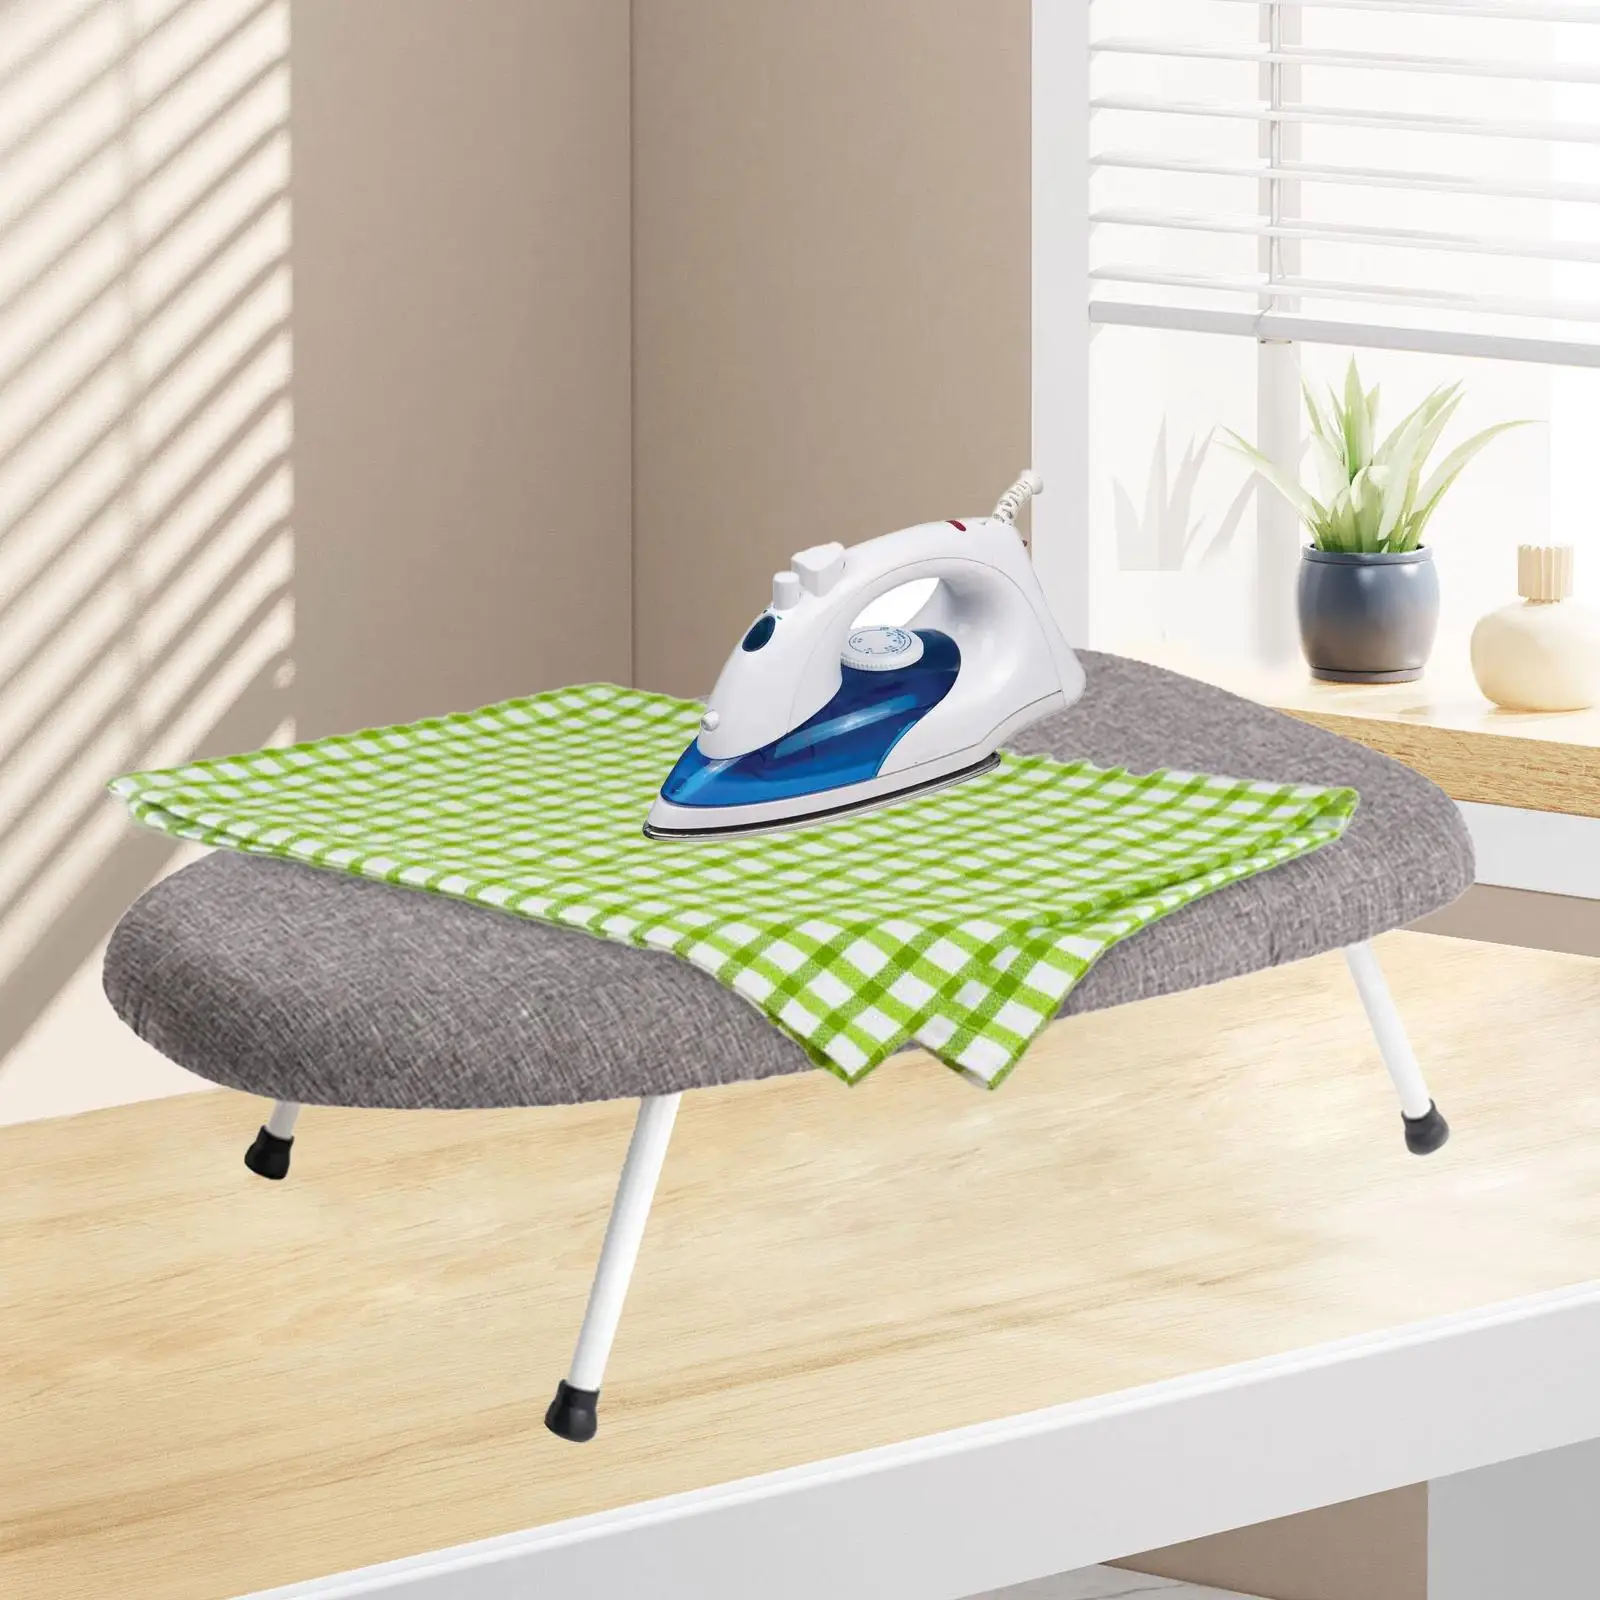 Tabletop Ironing Board Ironing Table Compact Foldable Small Iron Board Portable for Sewing Room Dorm Laundry Room Travel Clothes